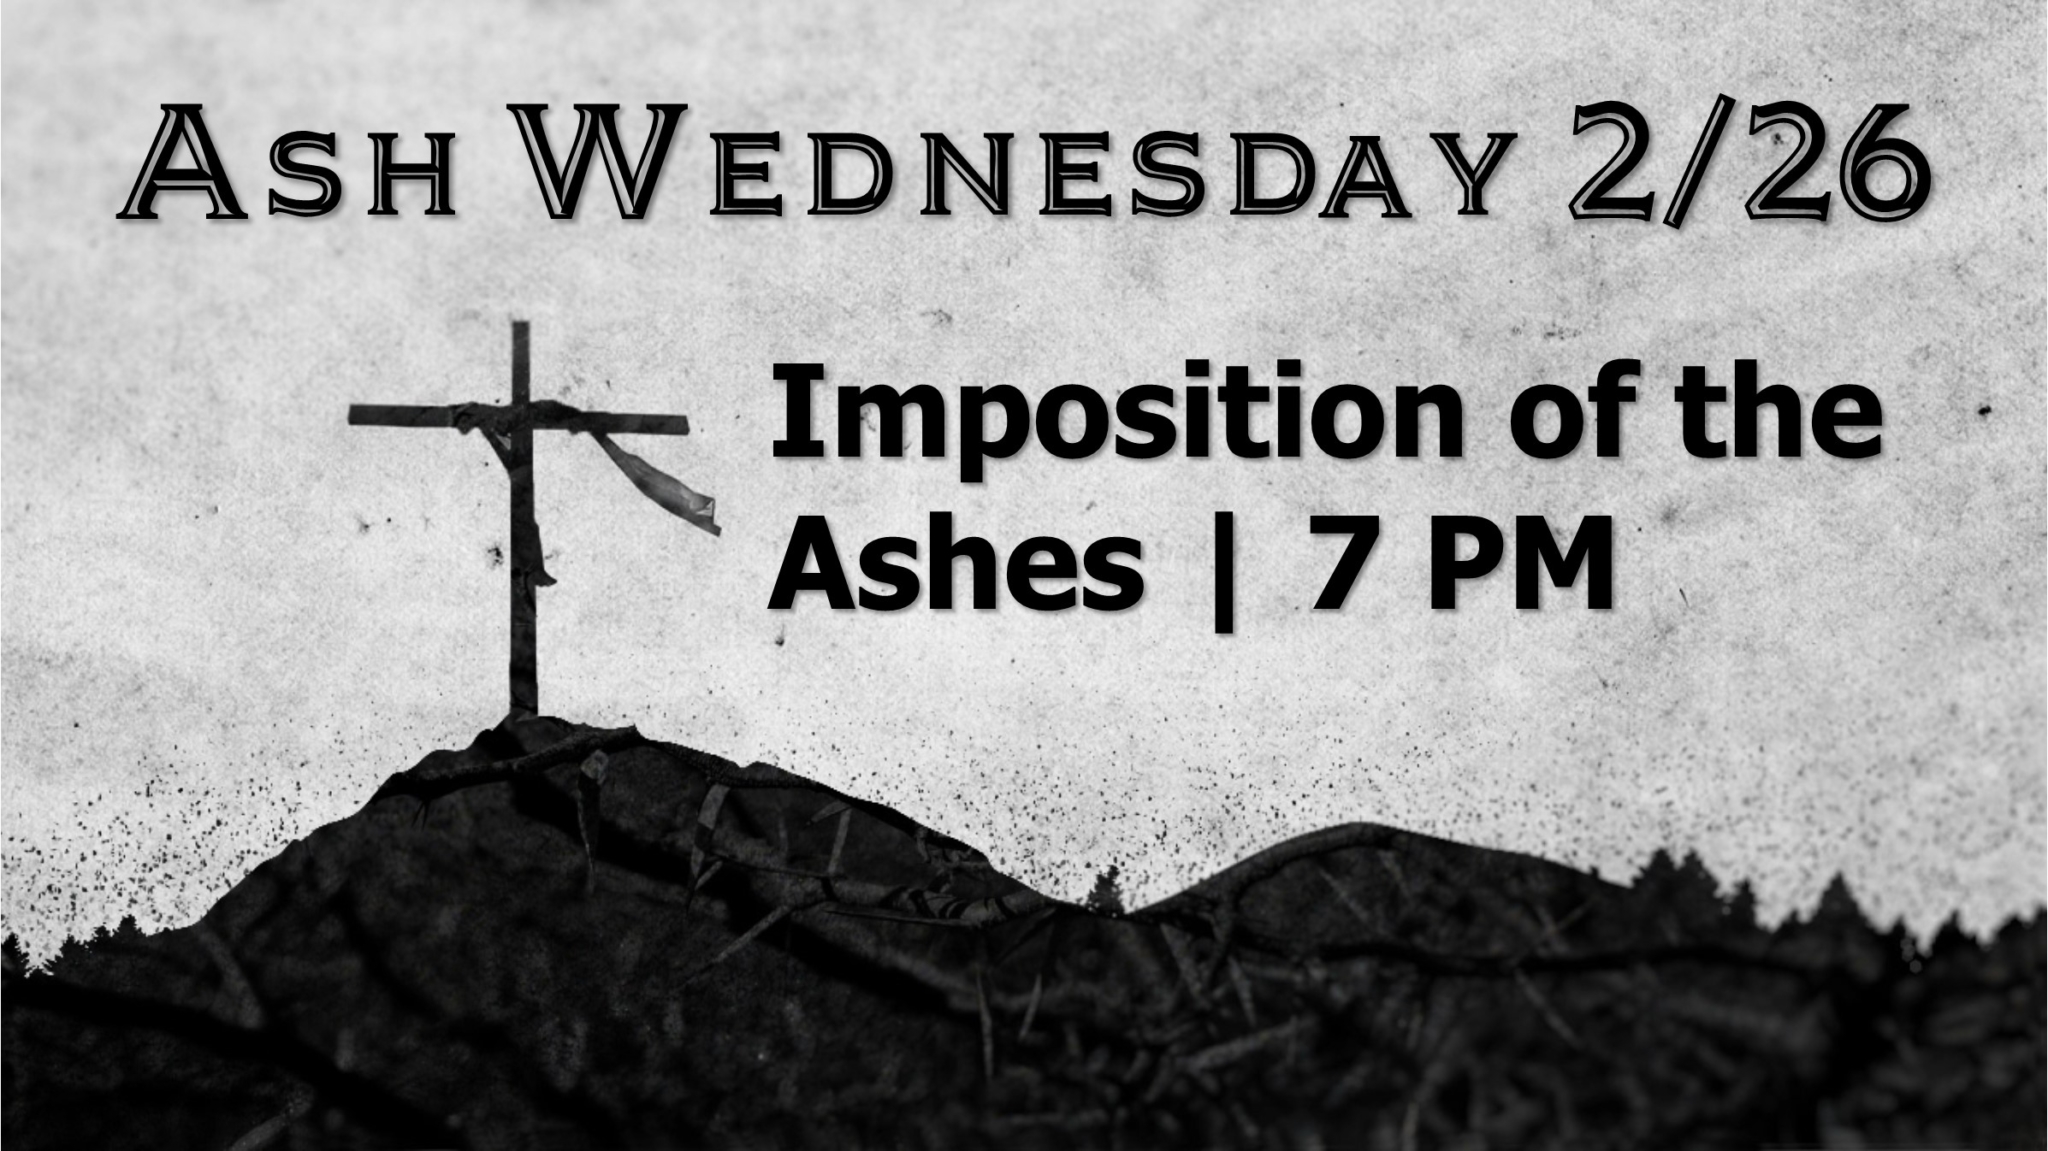 ash wednesday imposition of ashes